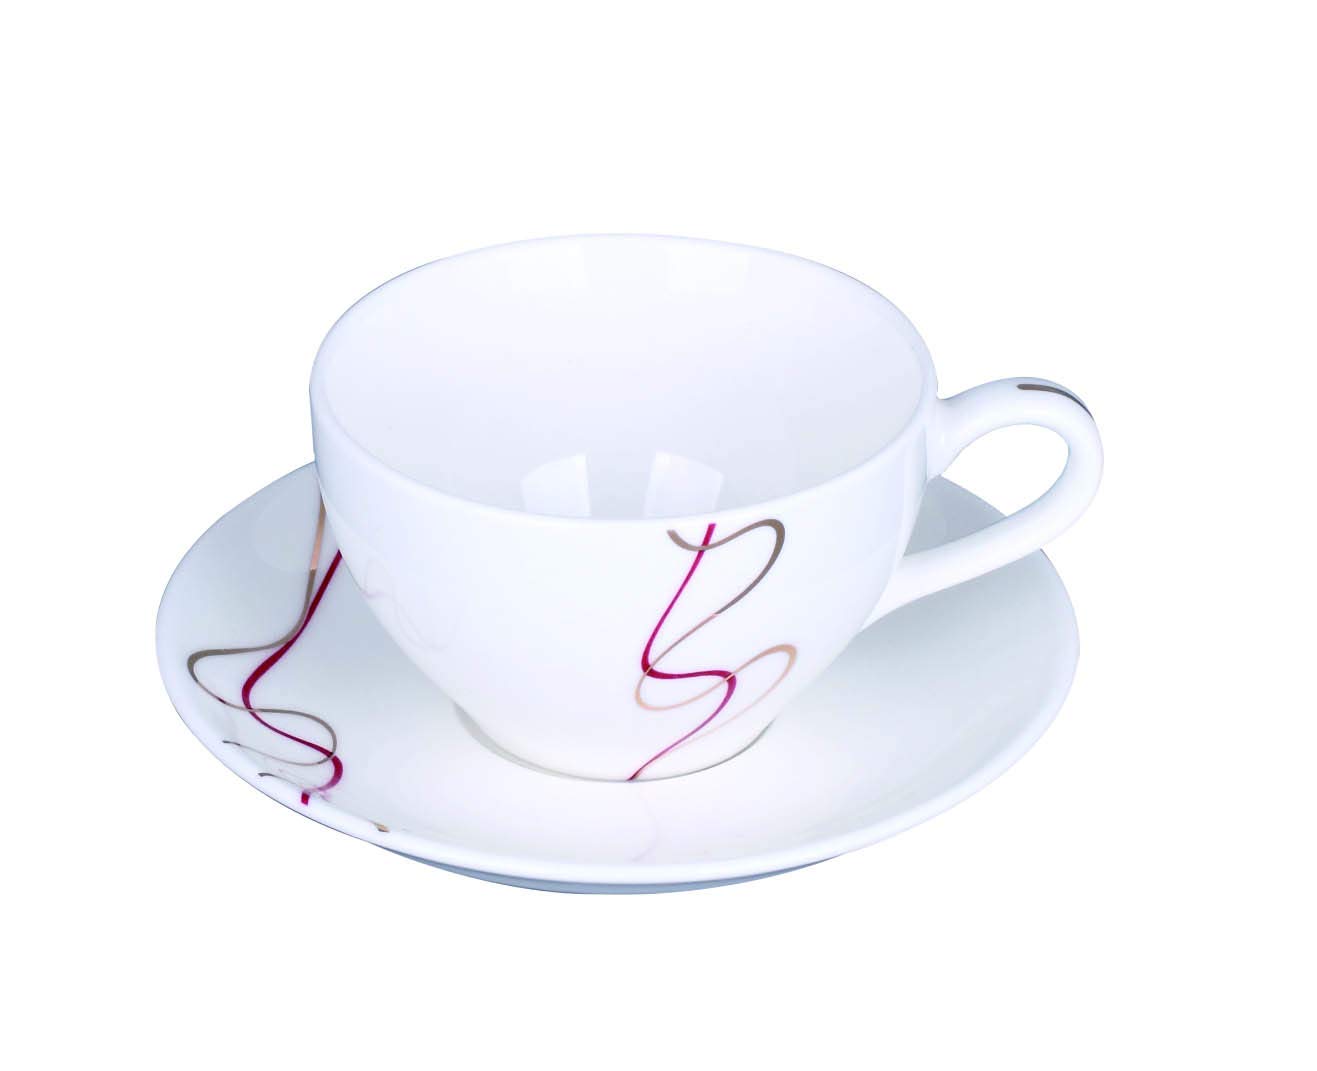 Royalford 12PCS Bone China Round Cup & Saucer Set – Ideal for Daily Use – Non-Toxic, Ecologically Tasteless, Smooth Surface, Translucent, Comfortable Grip and Lightweight